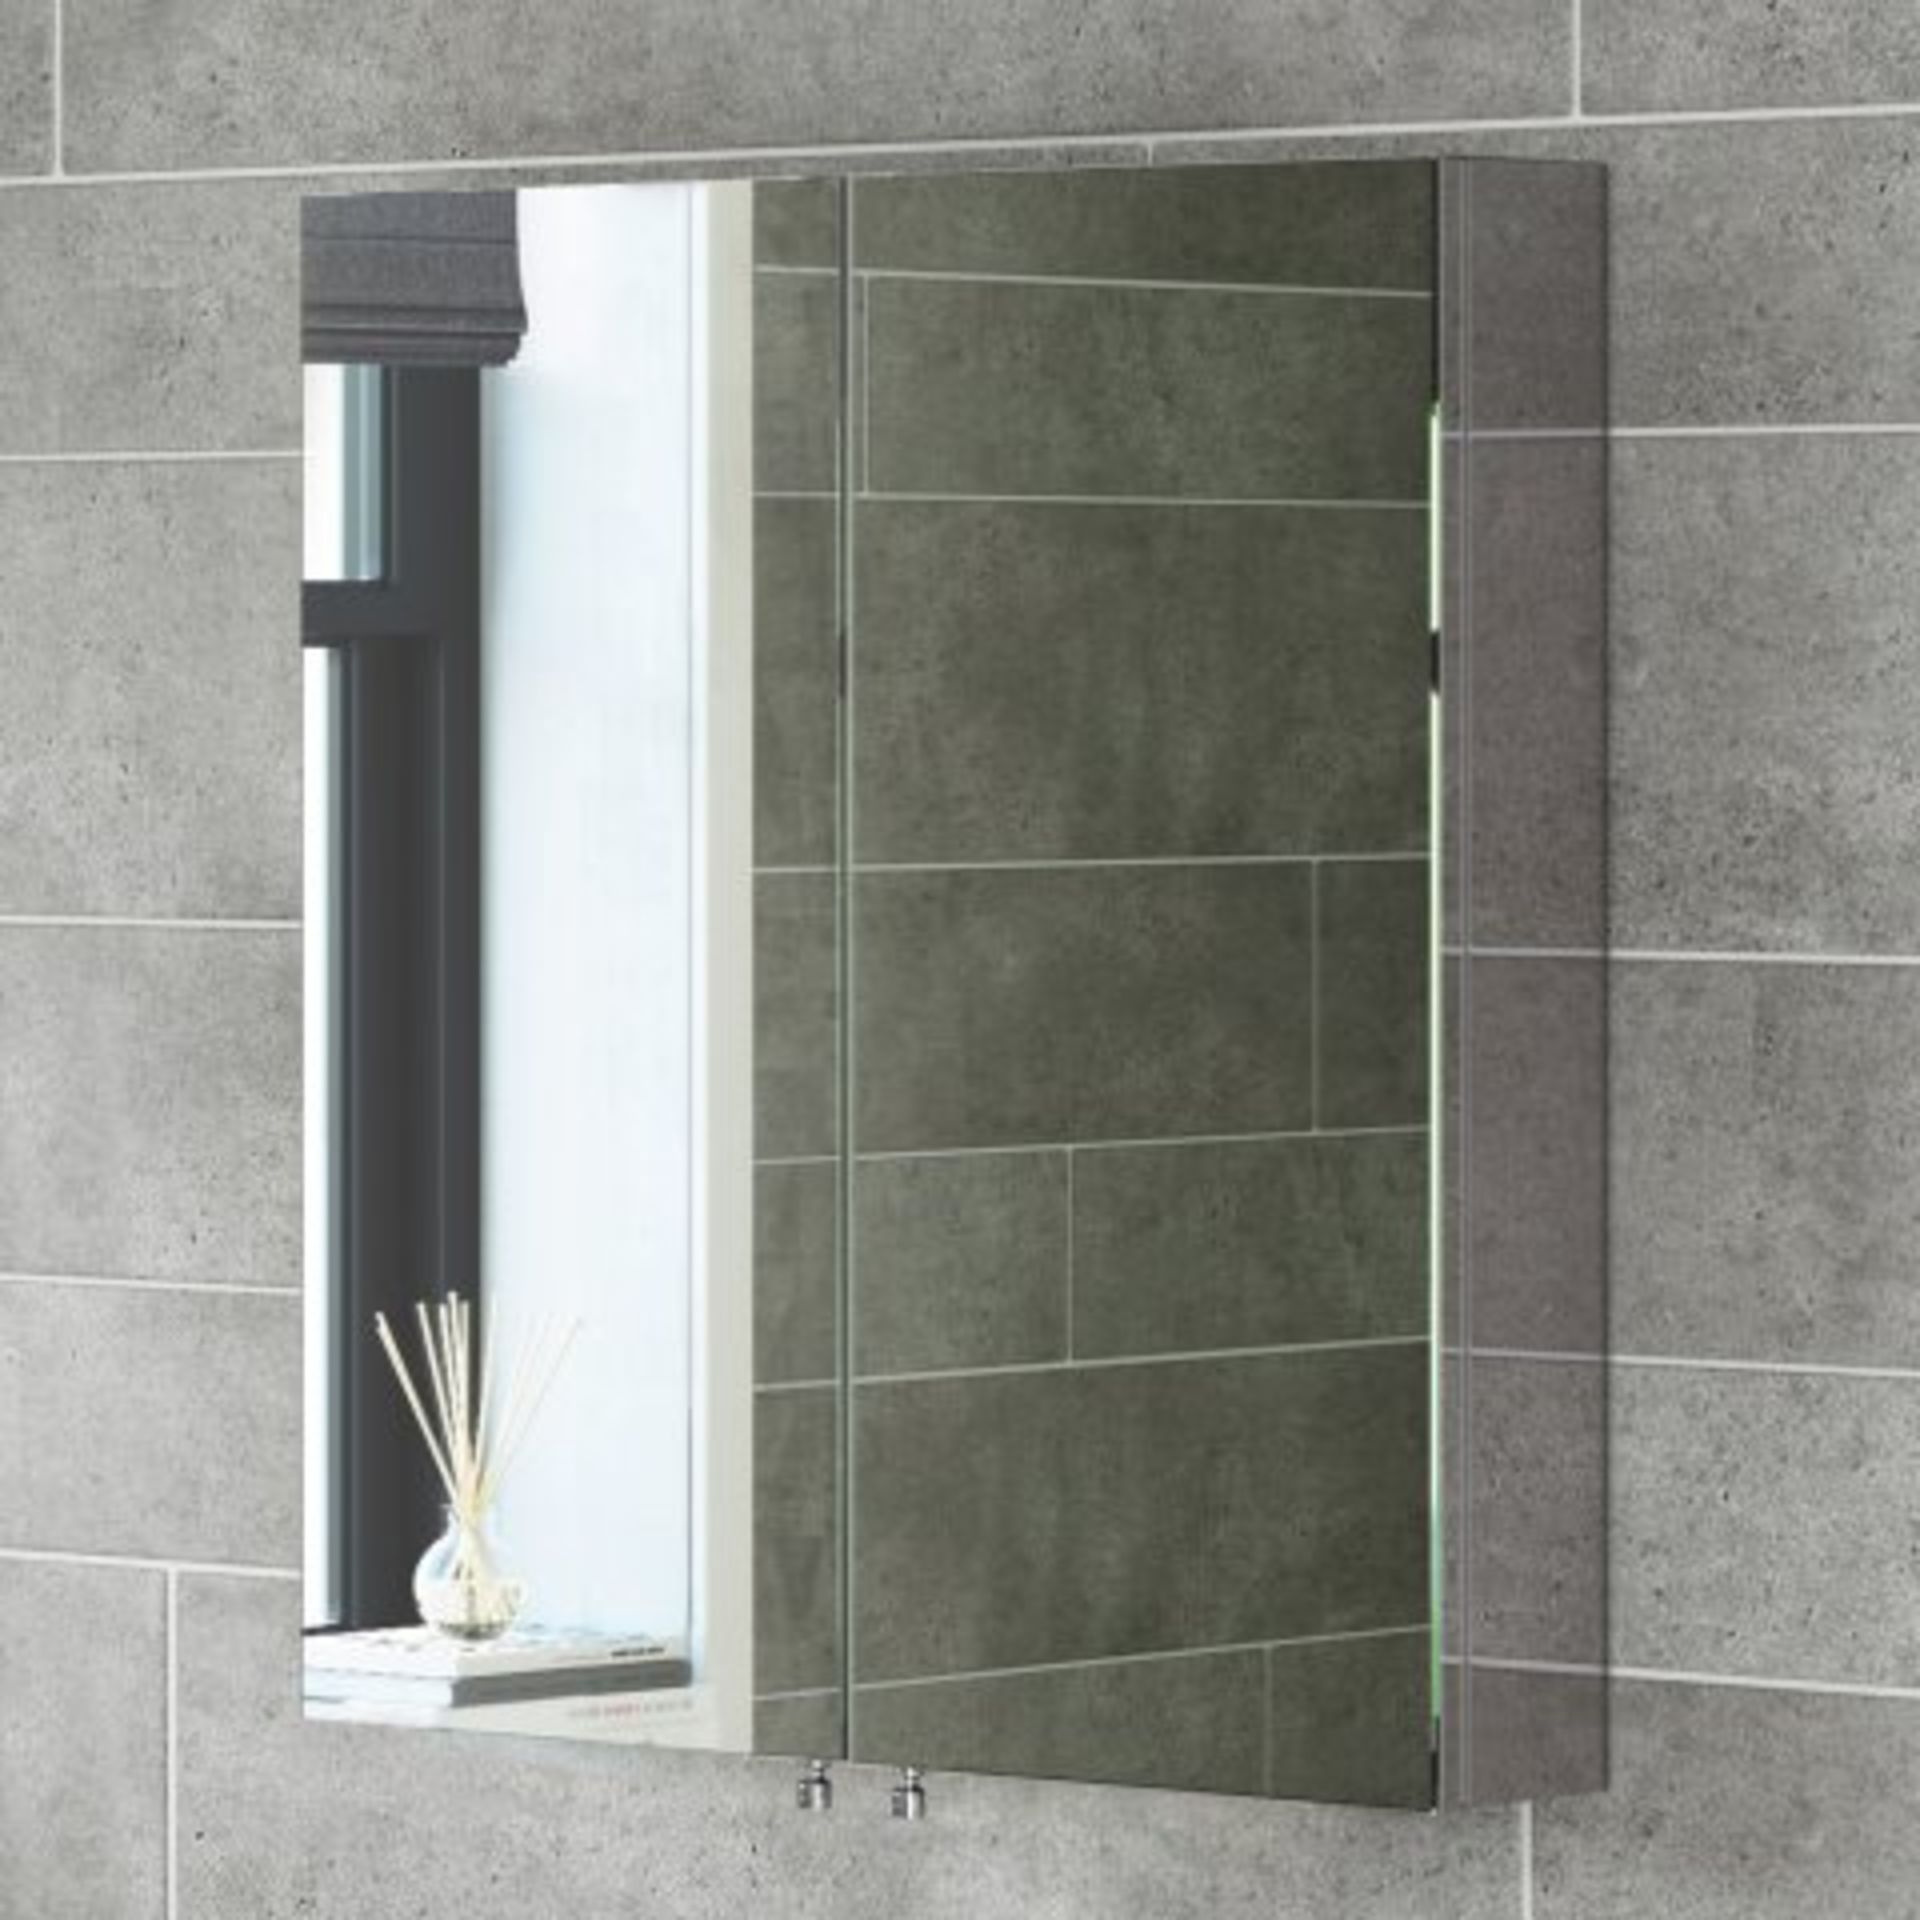 (V189) 670x600mm Liberty Stainless Steel Double Door Mirror Cabinet RRP £262.99 Perfect Reflection